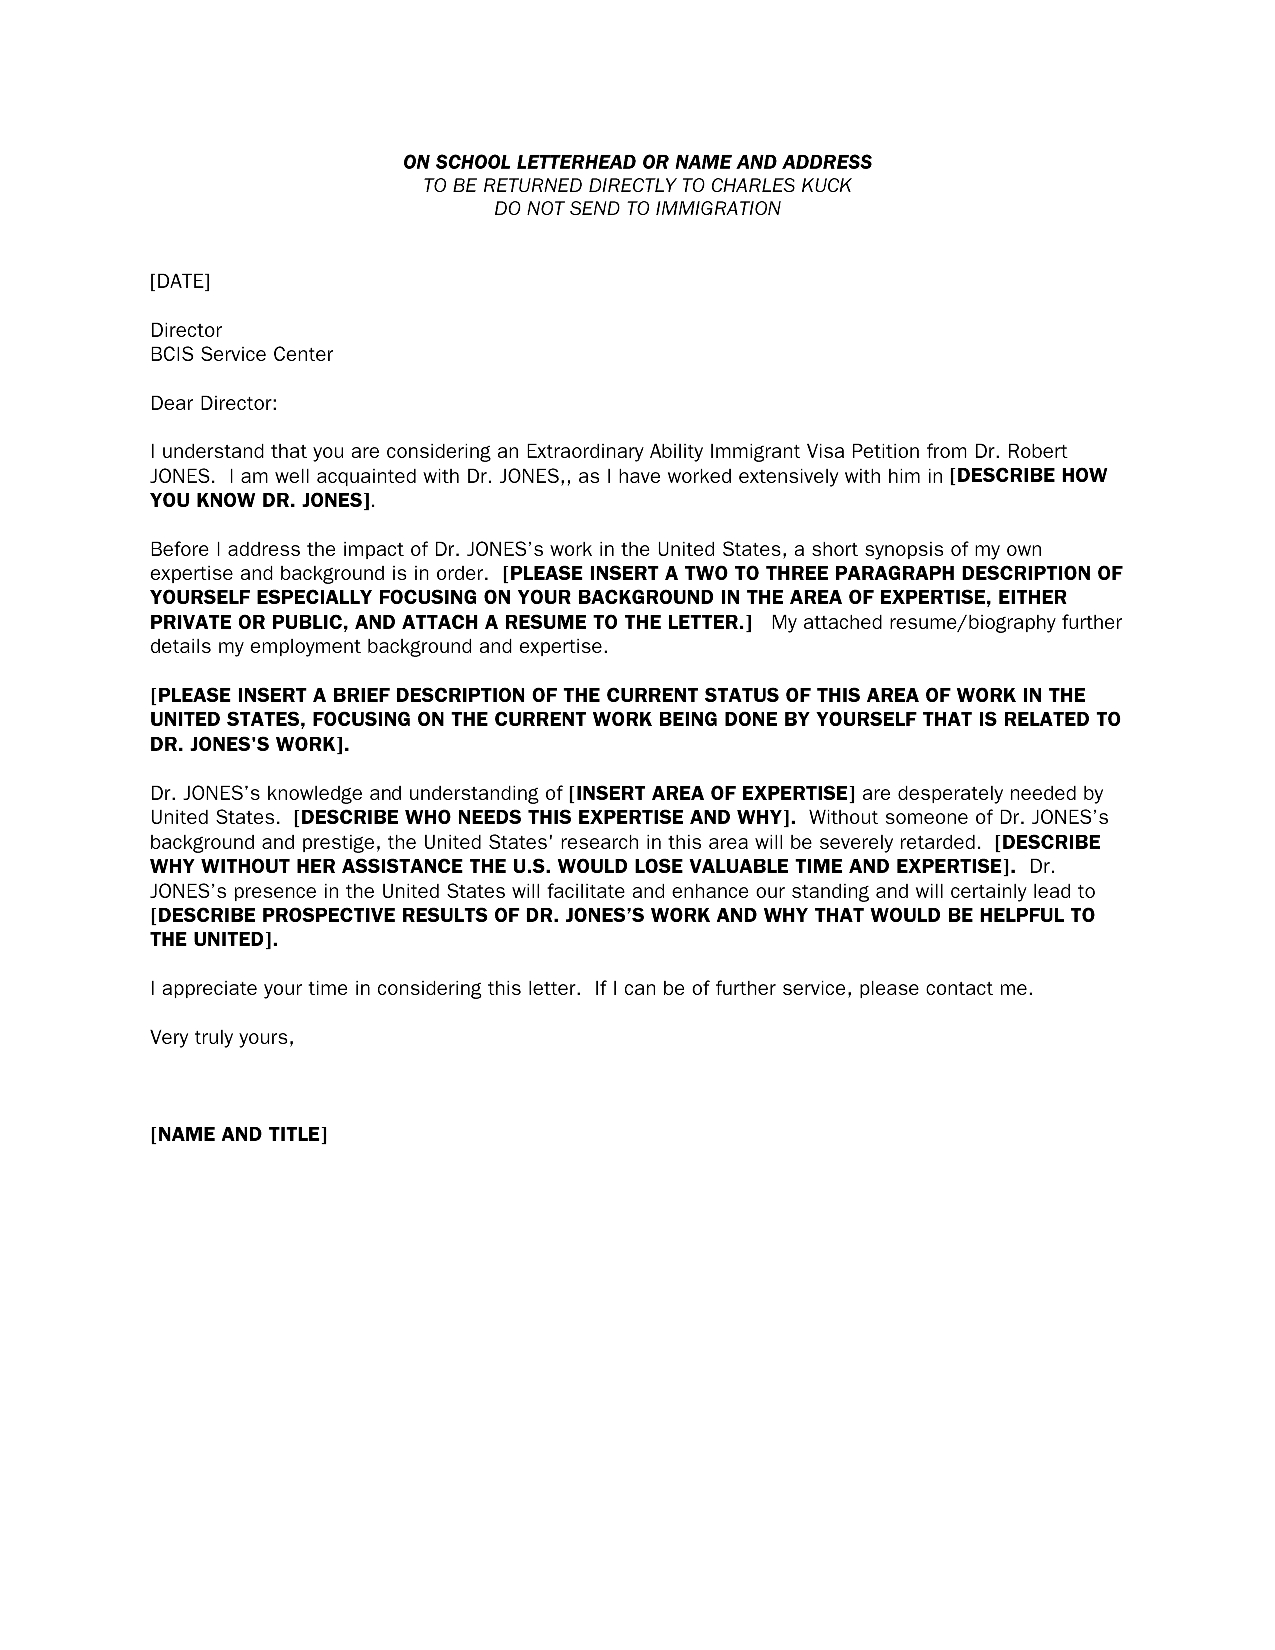 Immigration Reference Letter Template - Personal Re Mendation Letter Sample for Immigration Neuer